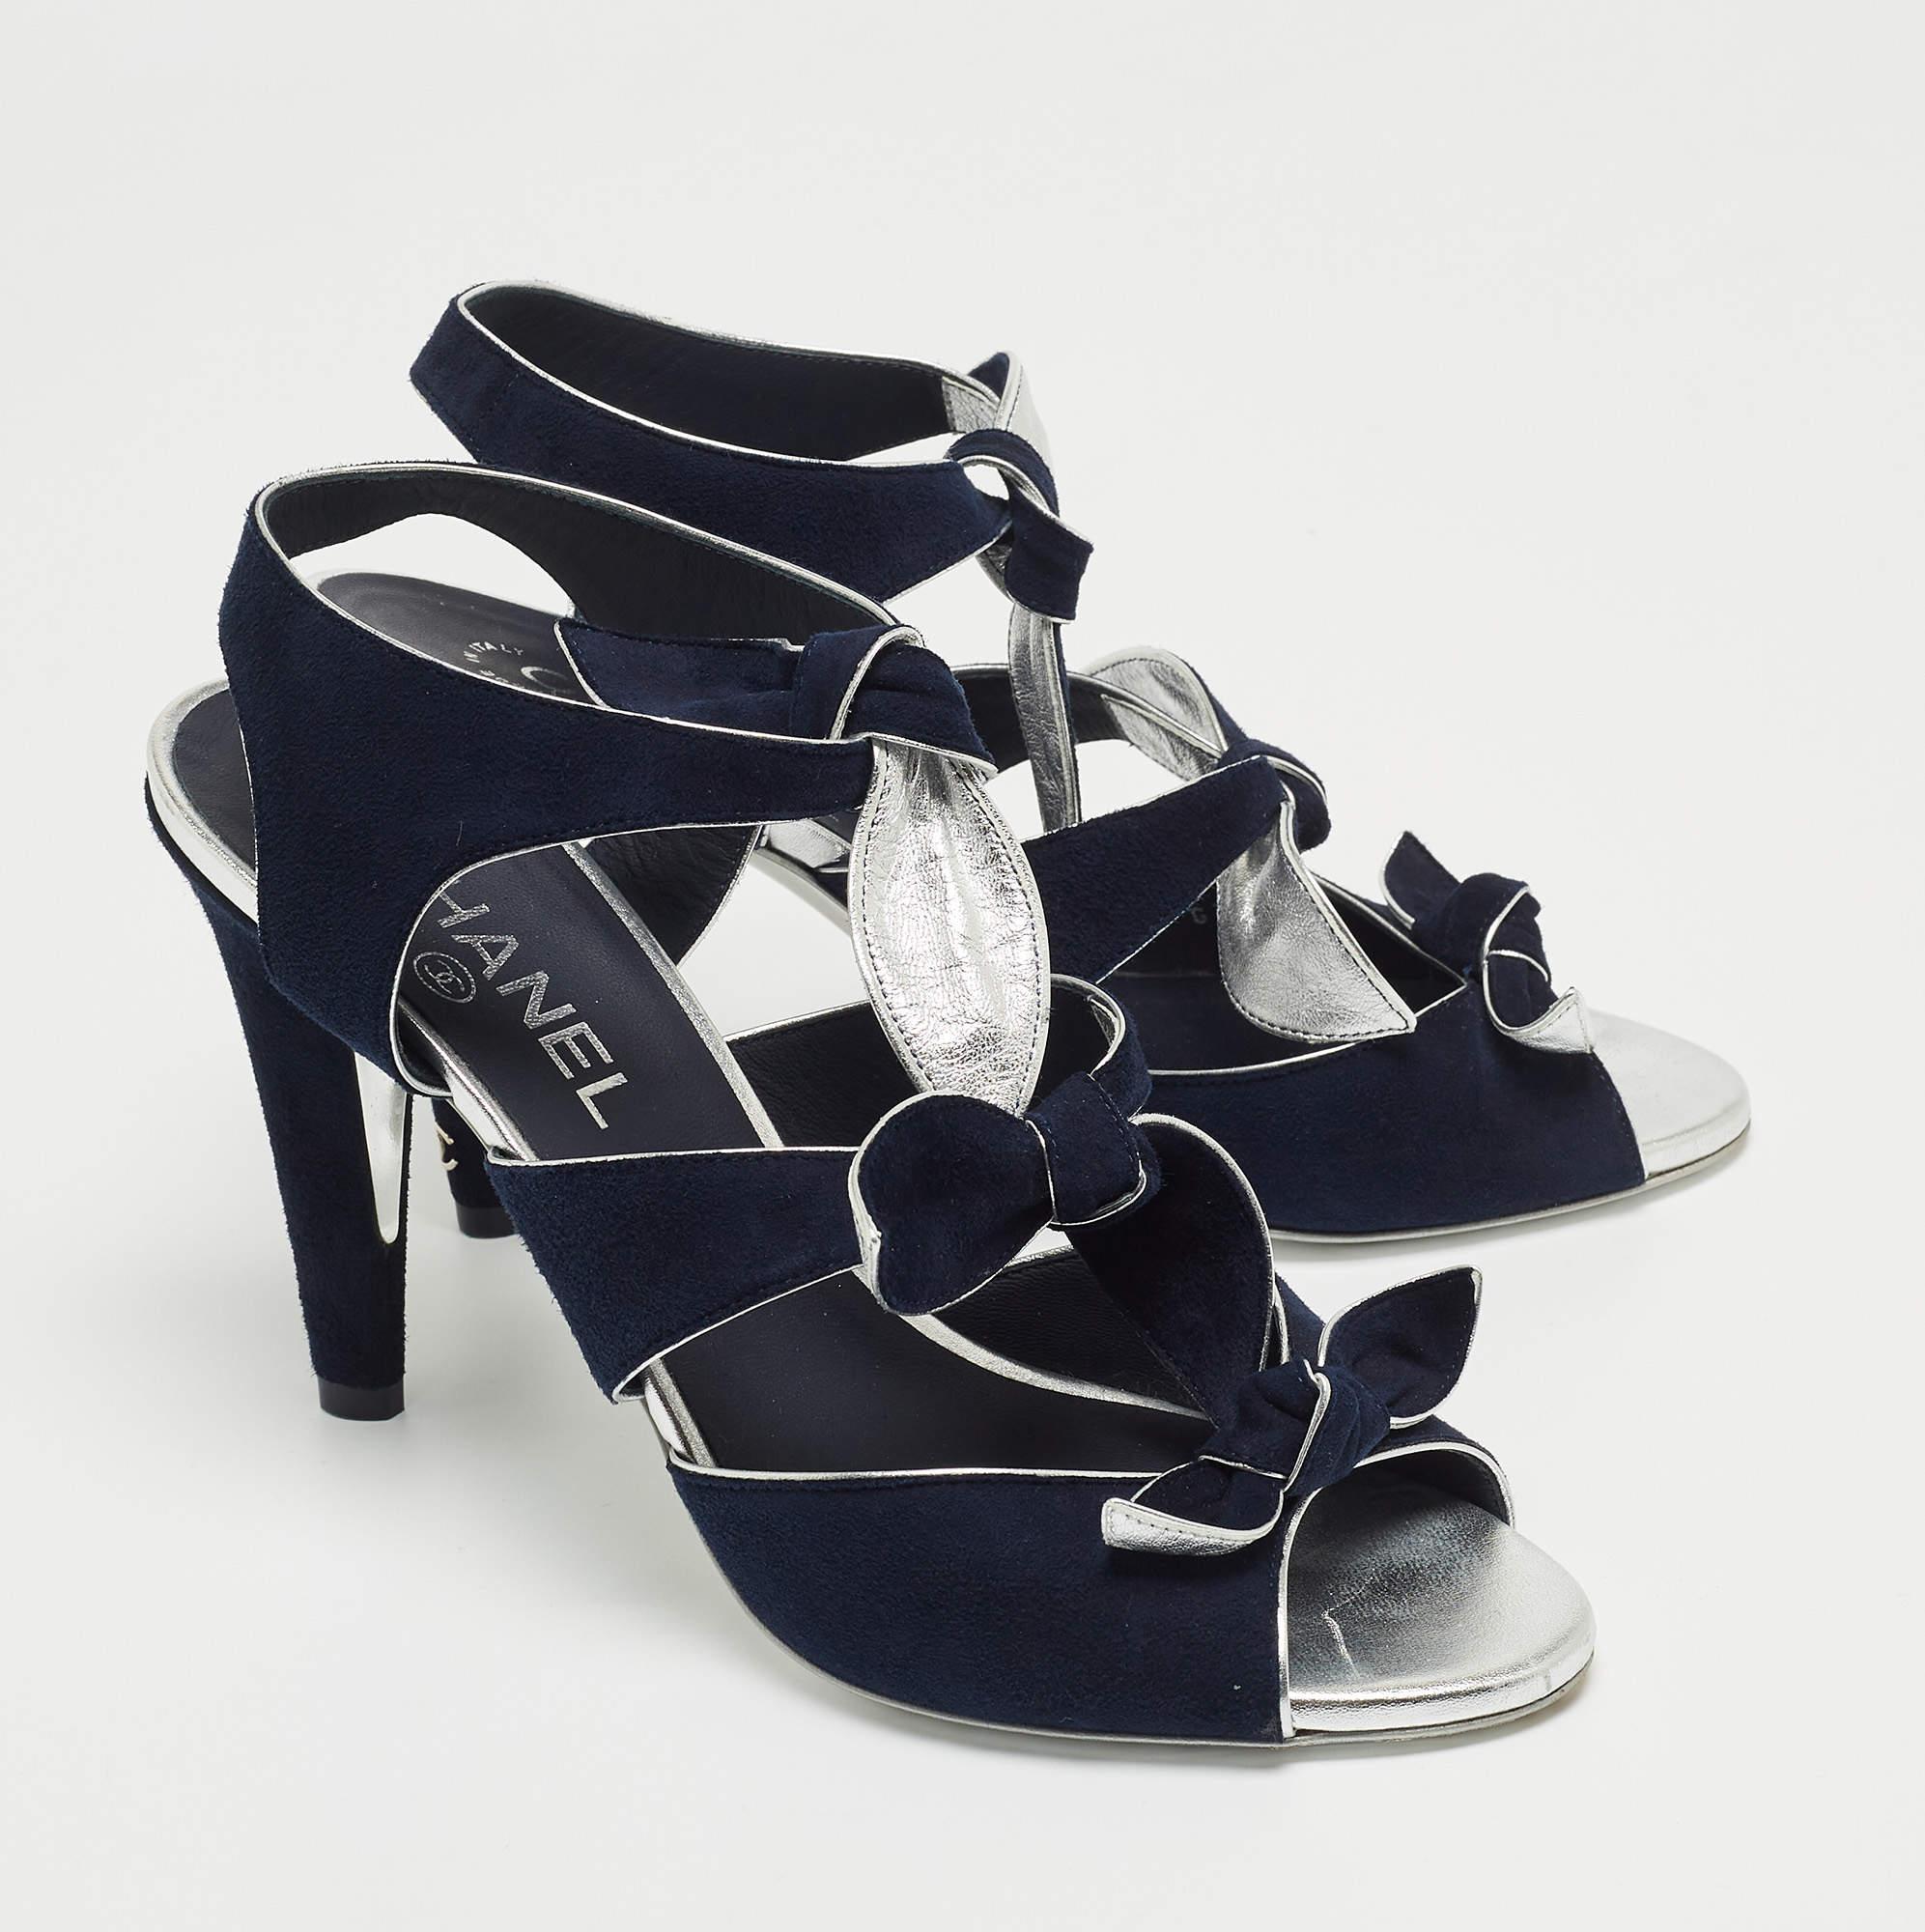 Chanel Navy Blue Suede Knotted Bow Ankle Strap Sandals Size 39 For Sale 1